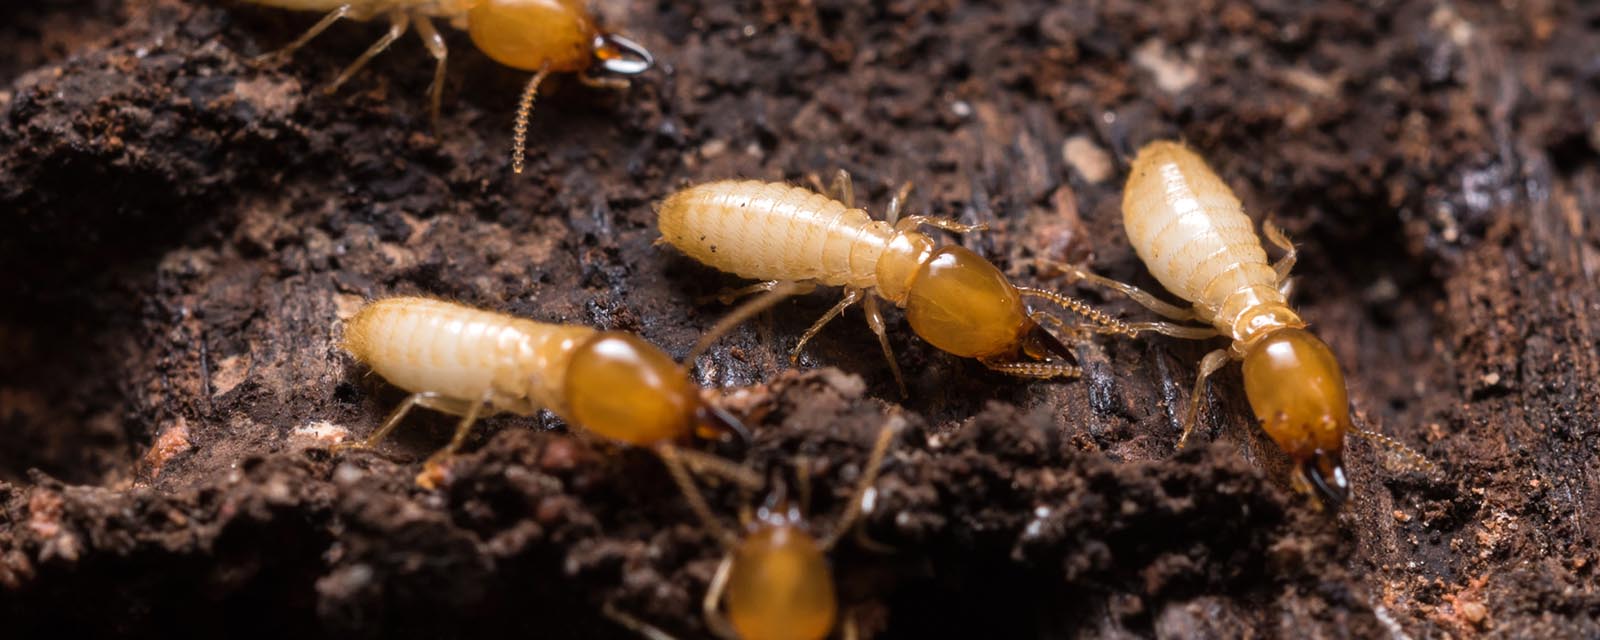 A termite inspection is an assessment of a property to identify any termite infestation or termite damage. It involves a thorough inspection of the interior and exterior of the property, including the attic, basement, crawl spaces, and other areas where termites may hide.